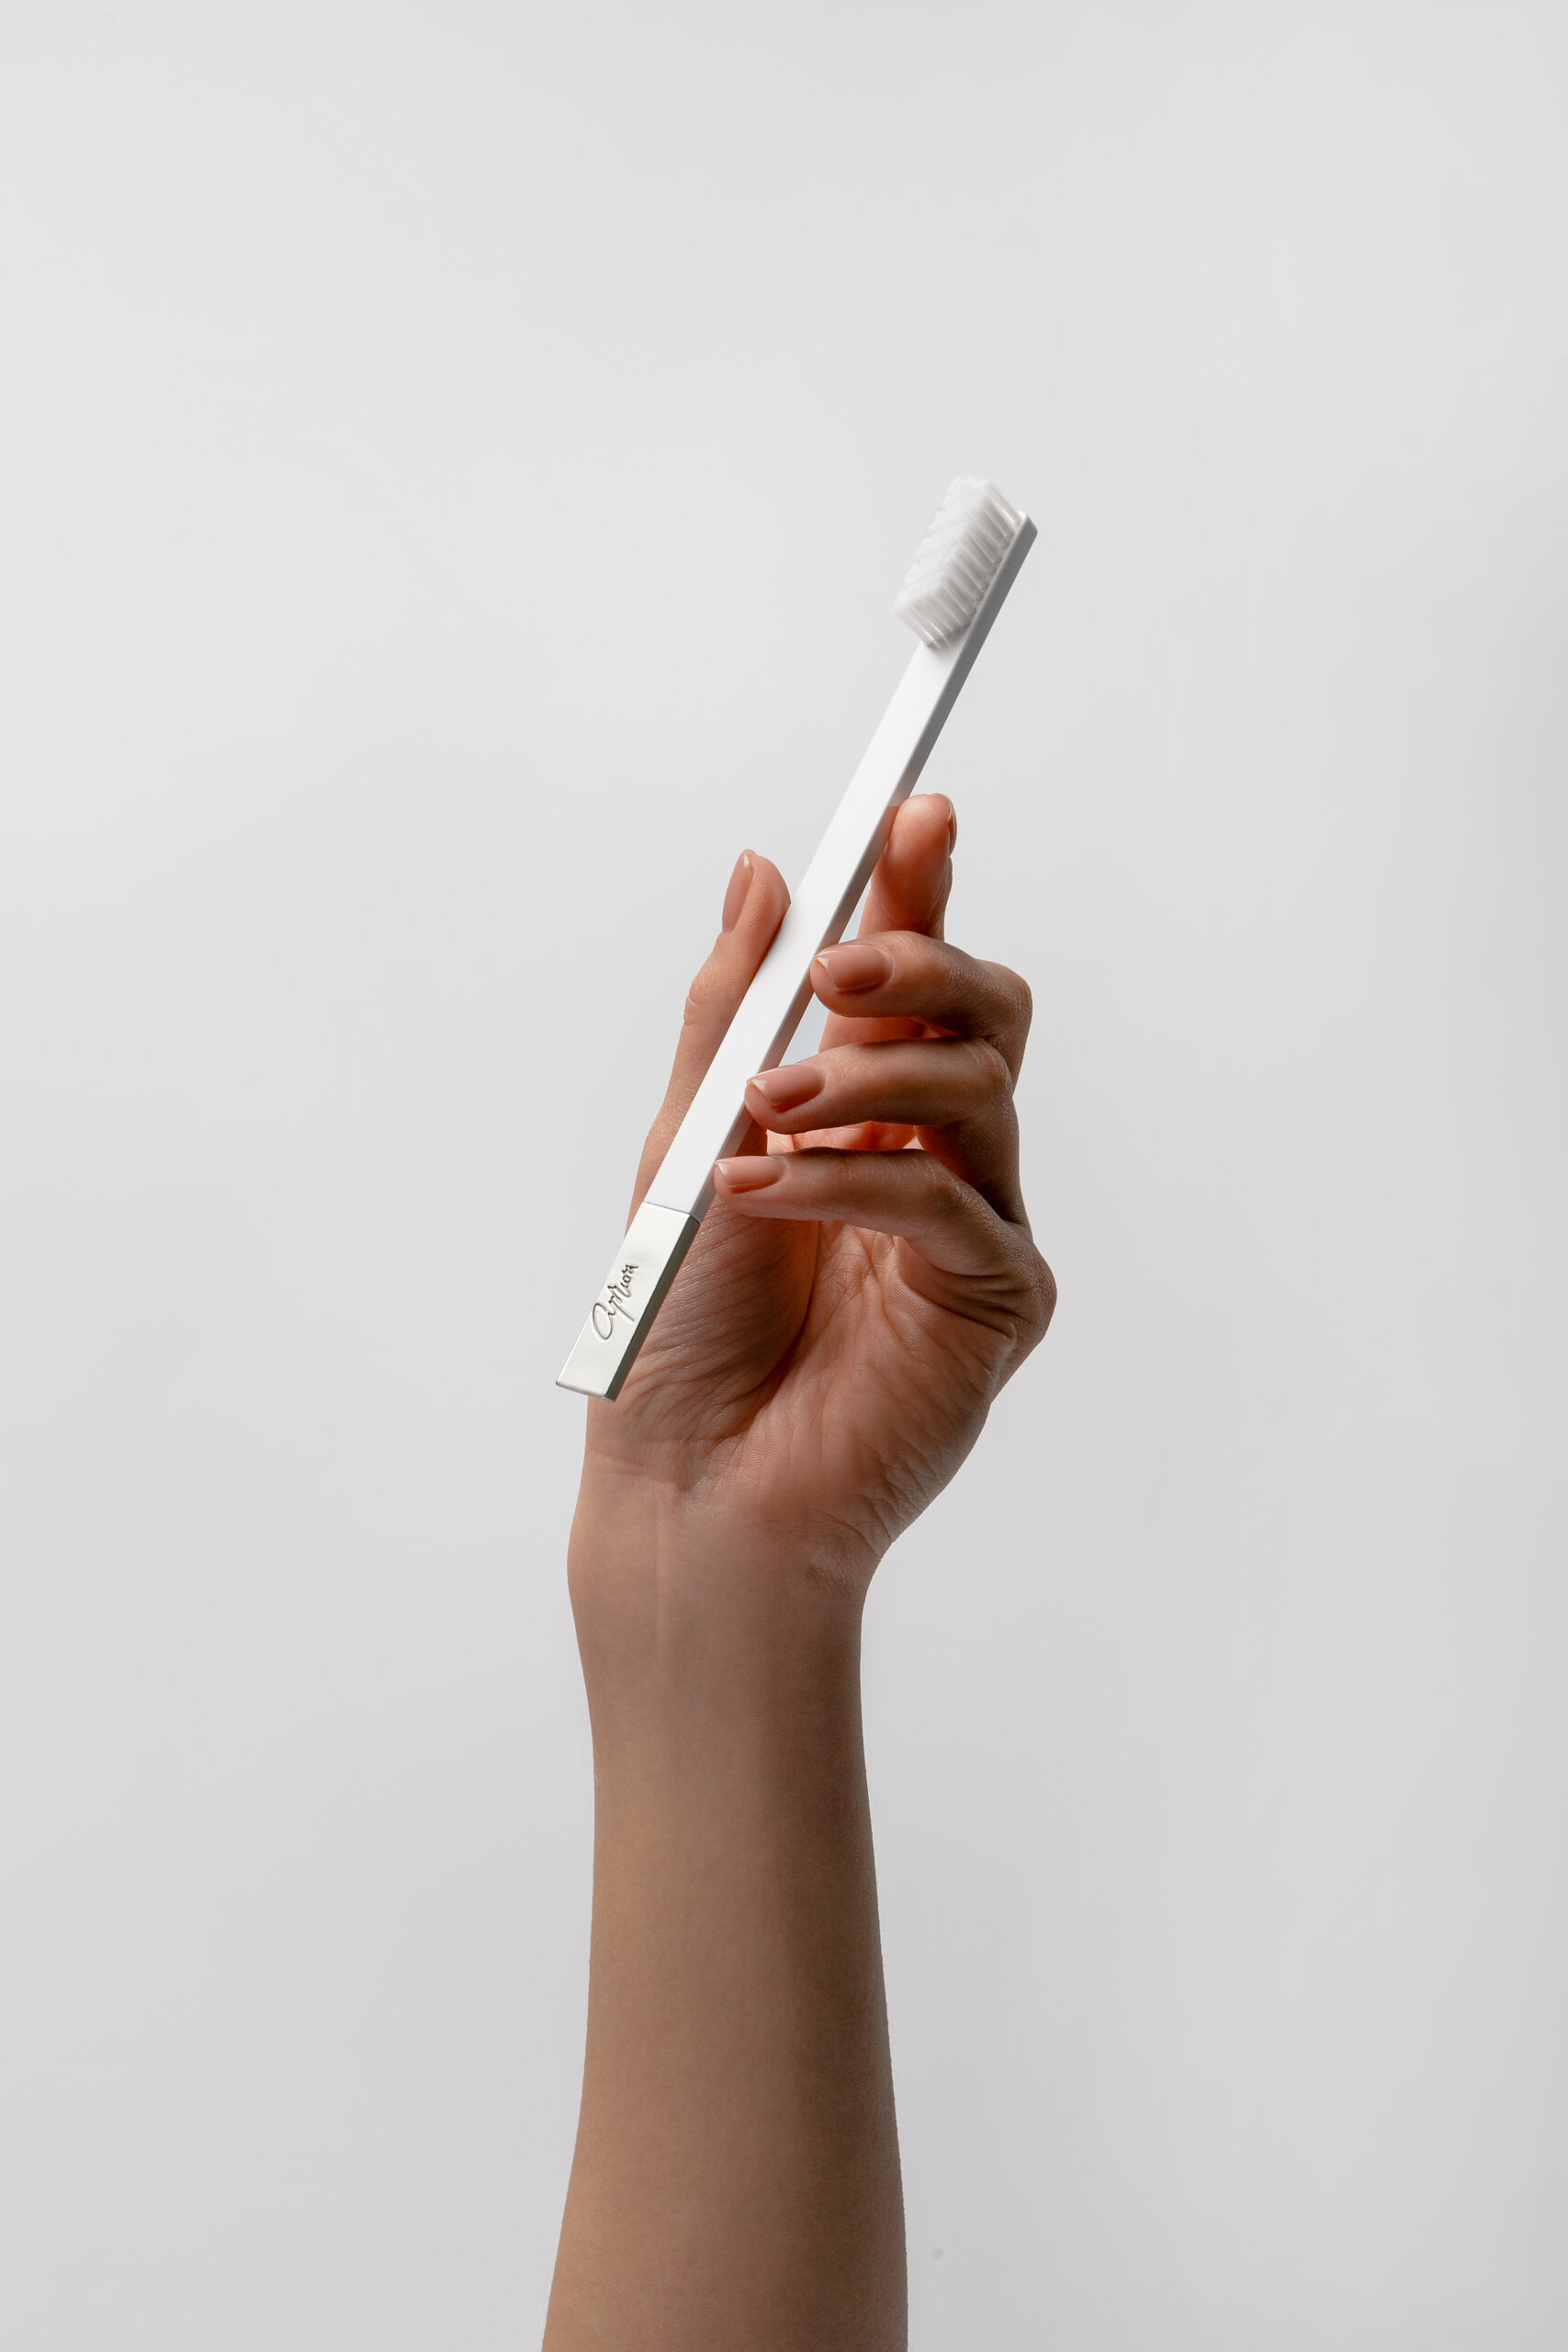 Our Sustainability - White Silver designer toothbrush SLIM by Apriori